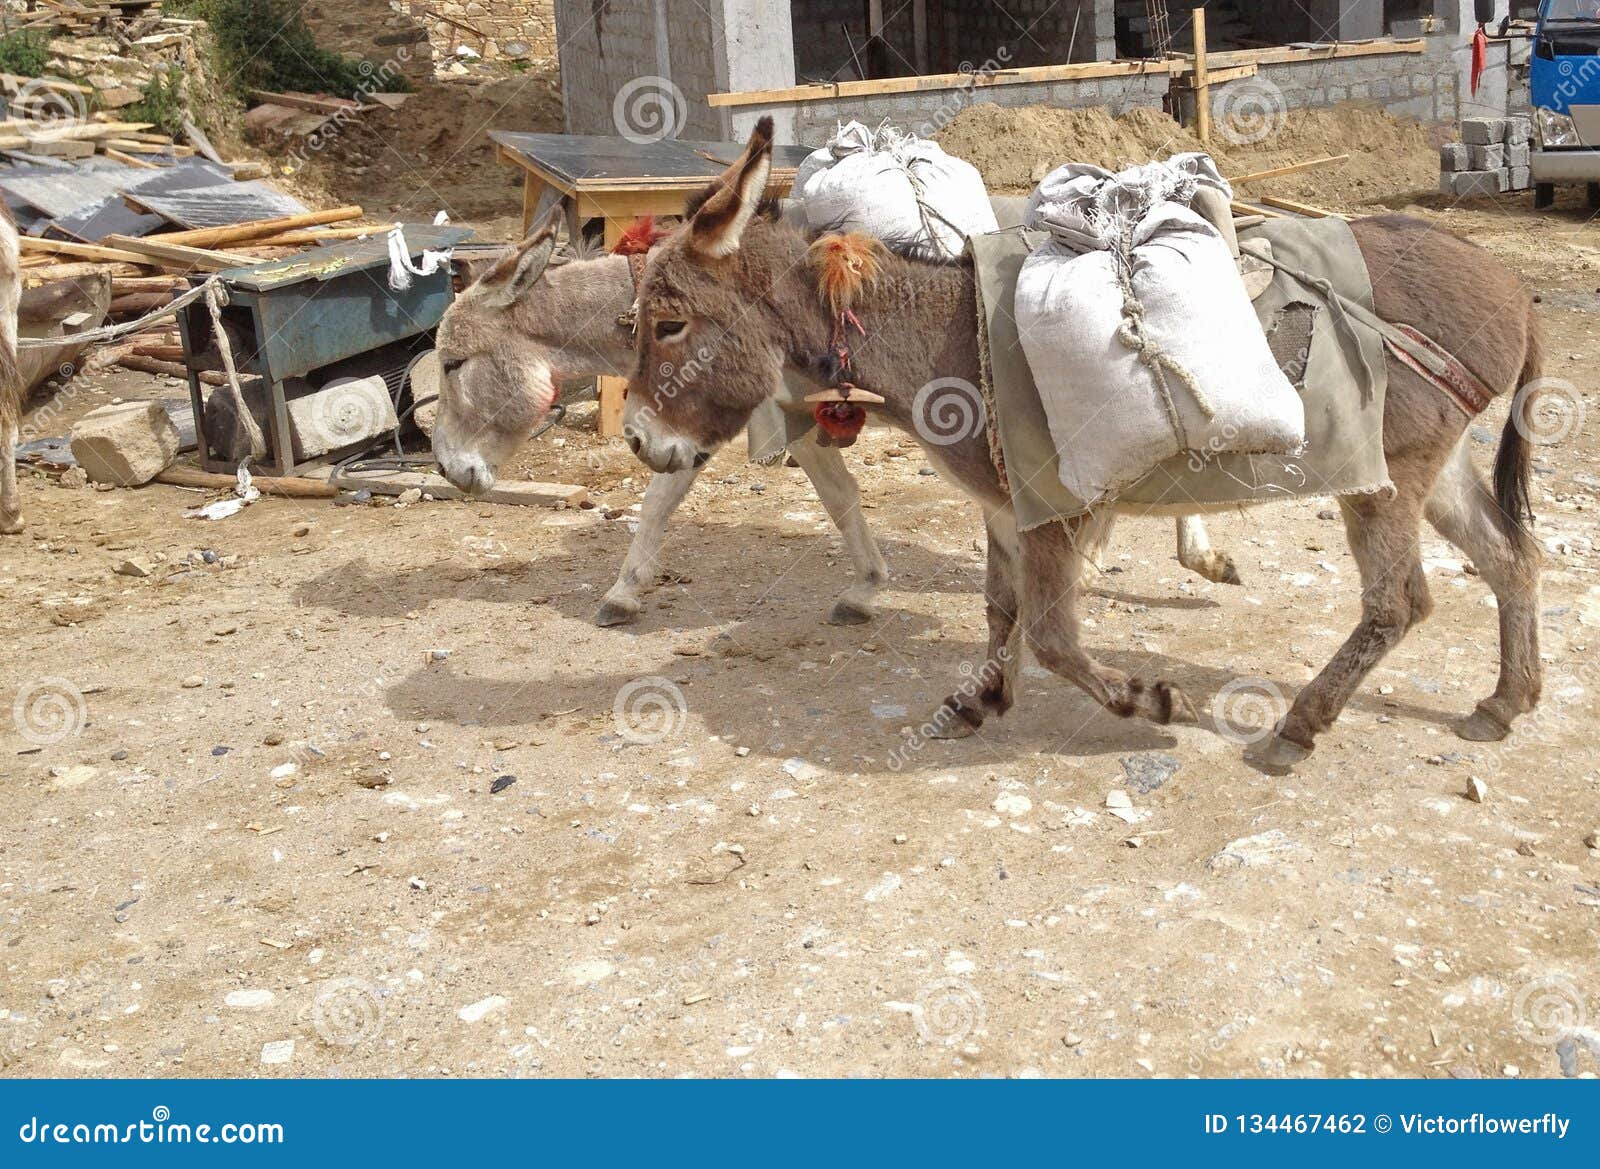 Working Animal Used As Draught or Pack Animals in Underdeveloped Areas,  Donkeys Ass, Mule, Jack Carrying Sacks in Construction Stock Photo - Image  of donkey, heavy: 134467462